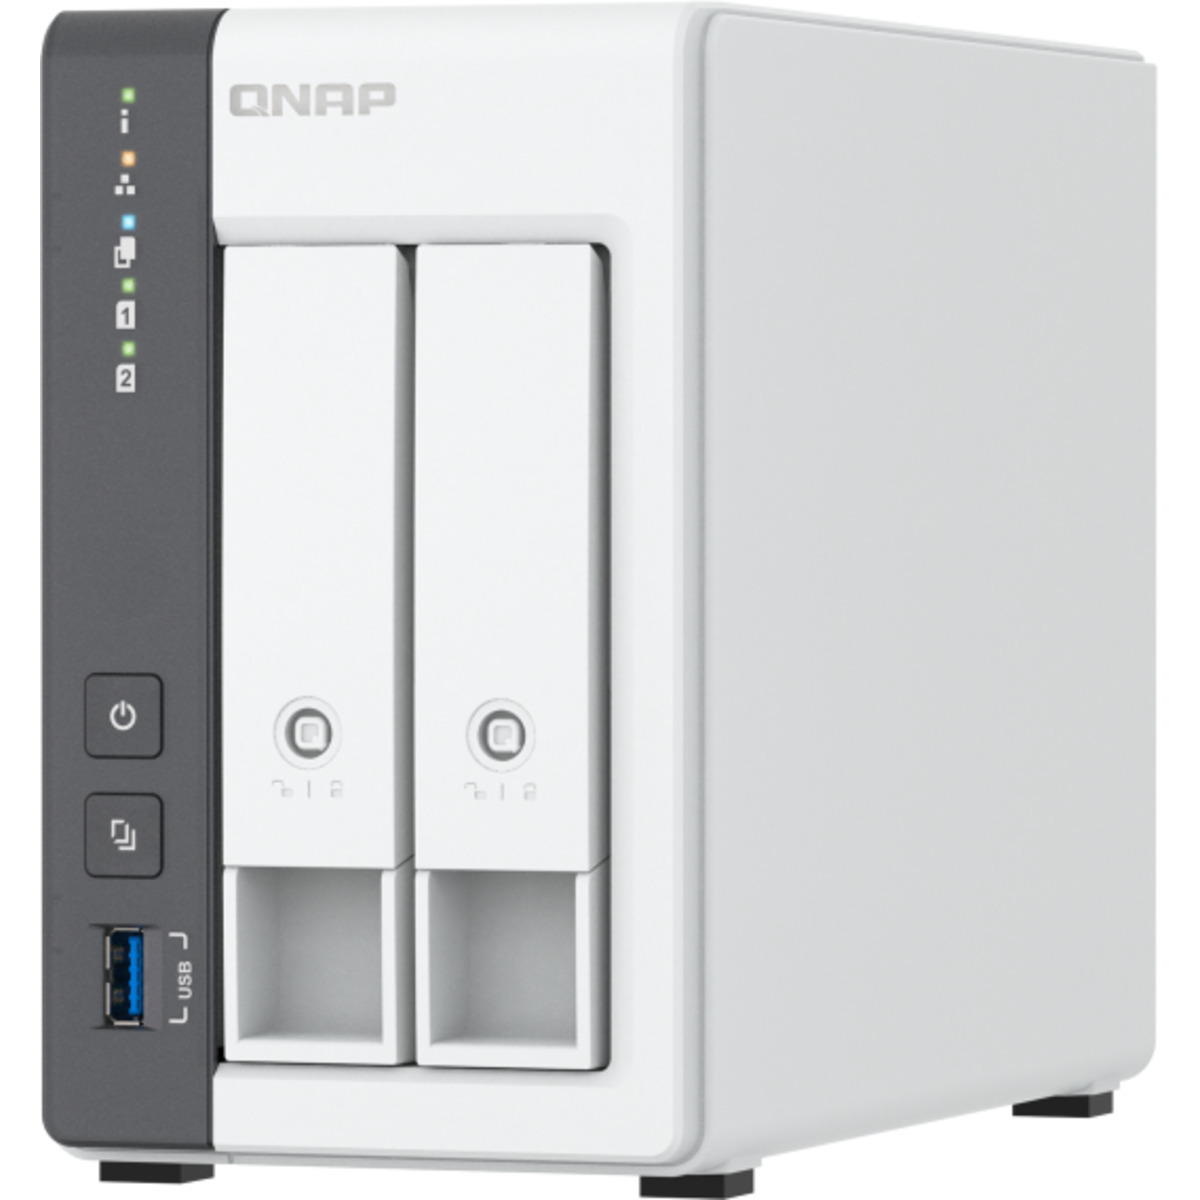 QNAP TS-216G 8tb 2-Bay Desktop Personal / Basic Home / Small Office NAS - Network Attached Storage Device 2x4tb Sandisk Ultra 3D SDSSDH3-4T00 2.5 560/520MB/s SATA 6Gb/s SSD CONSUMER Class Drives Installed - Burn-In Tested TS-216G